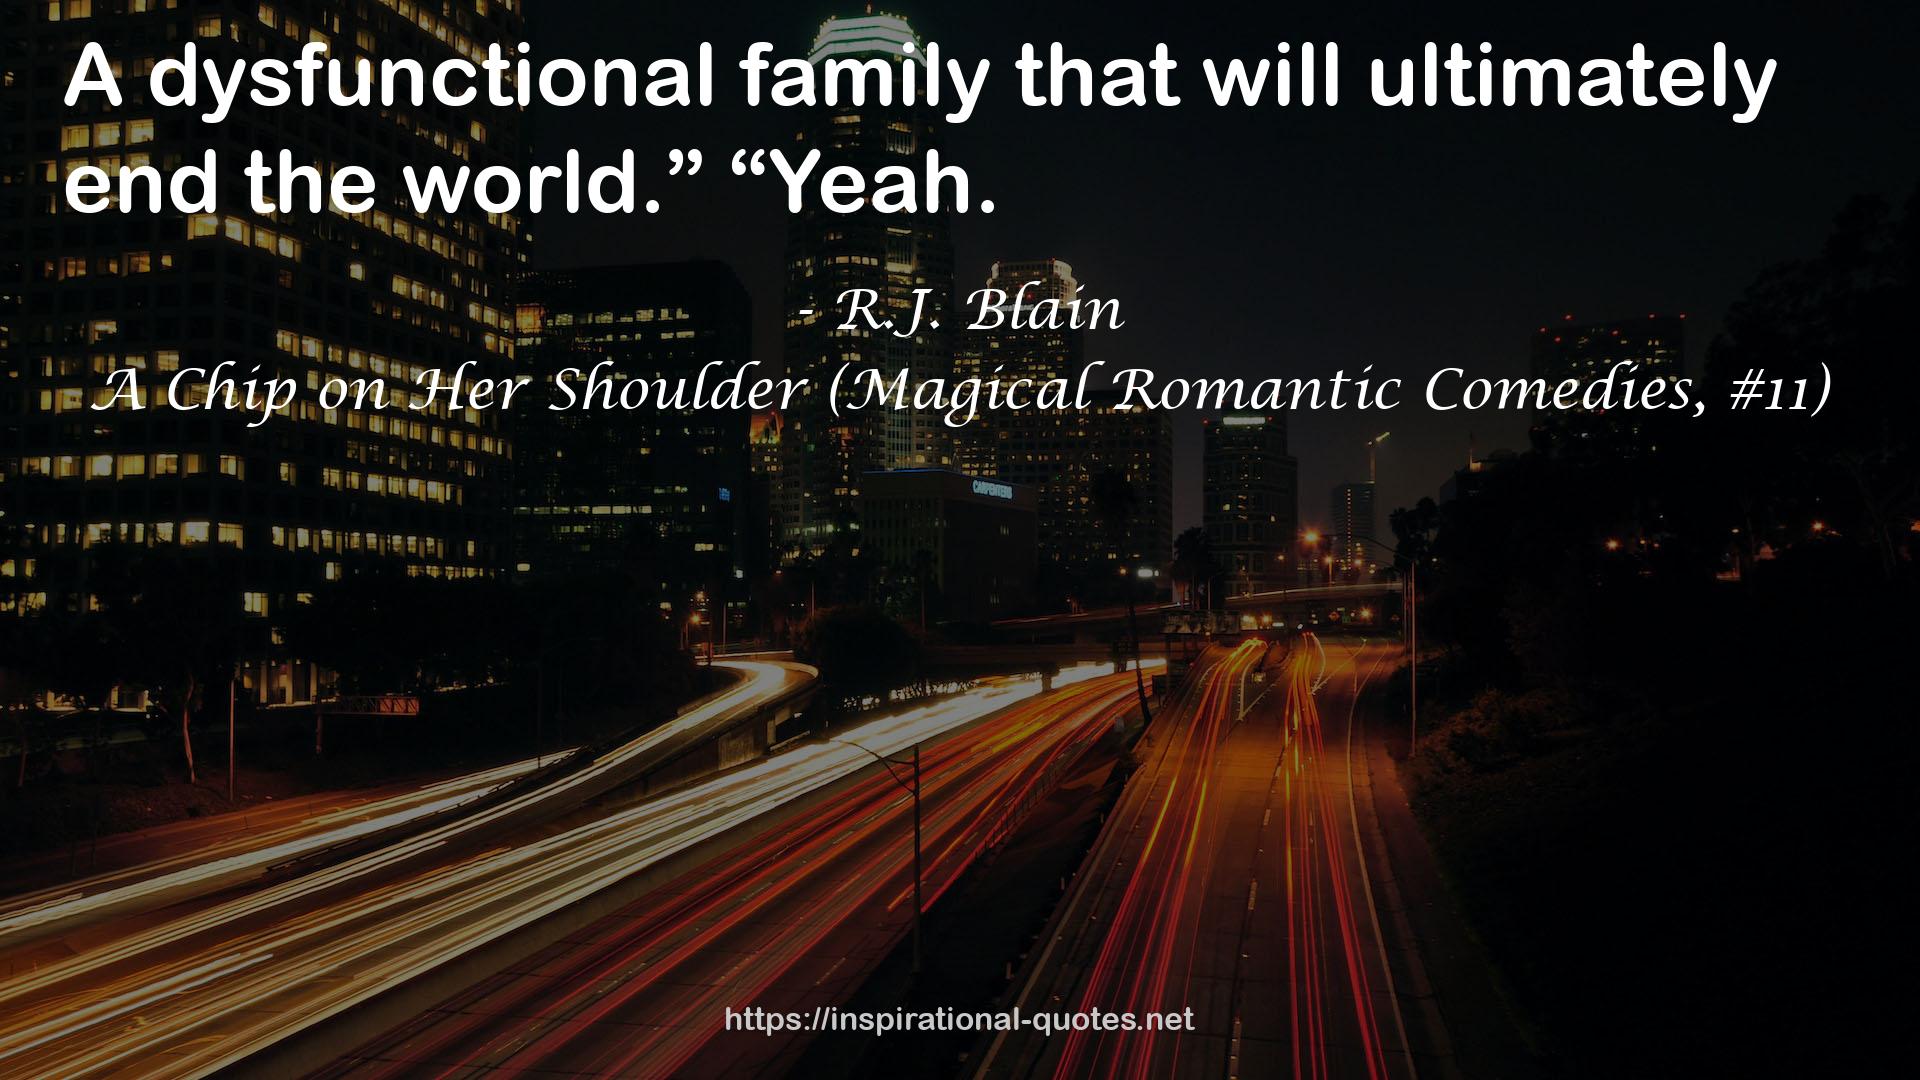 A Chip on Her Shoulder (Magical Romantic Comedies, #11) QUOTES